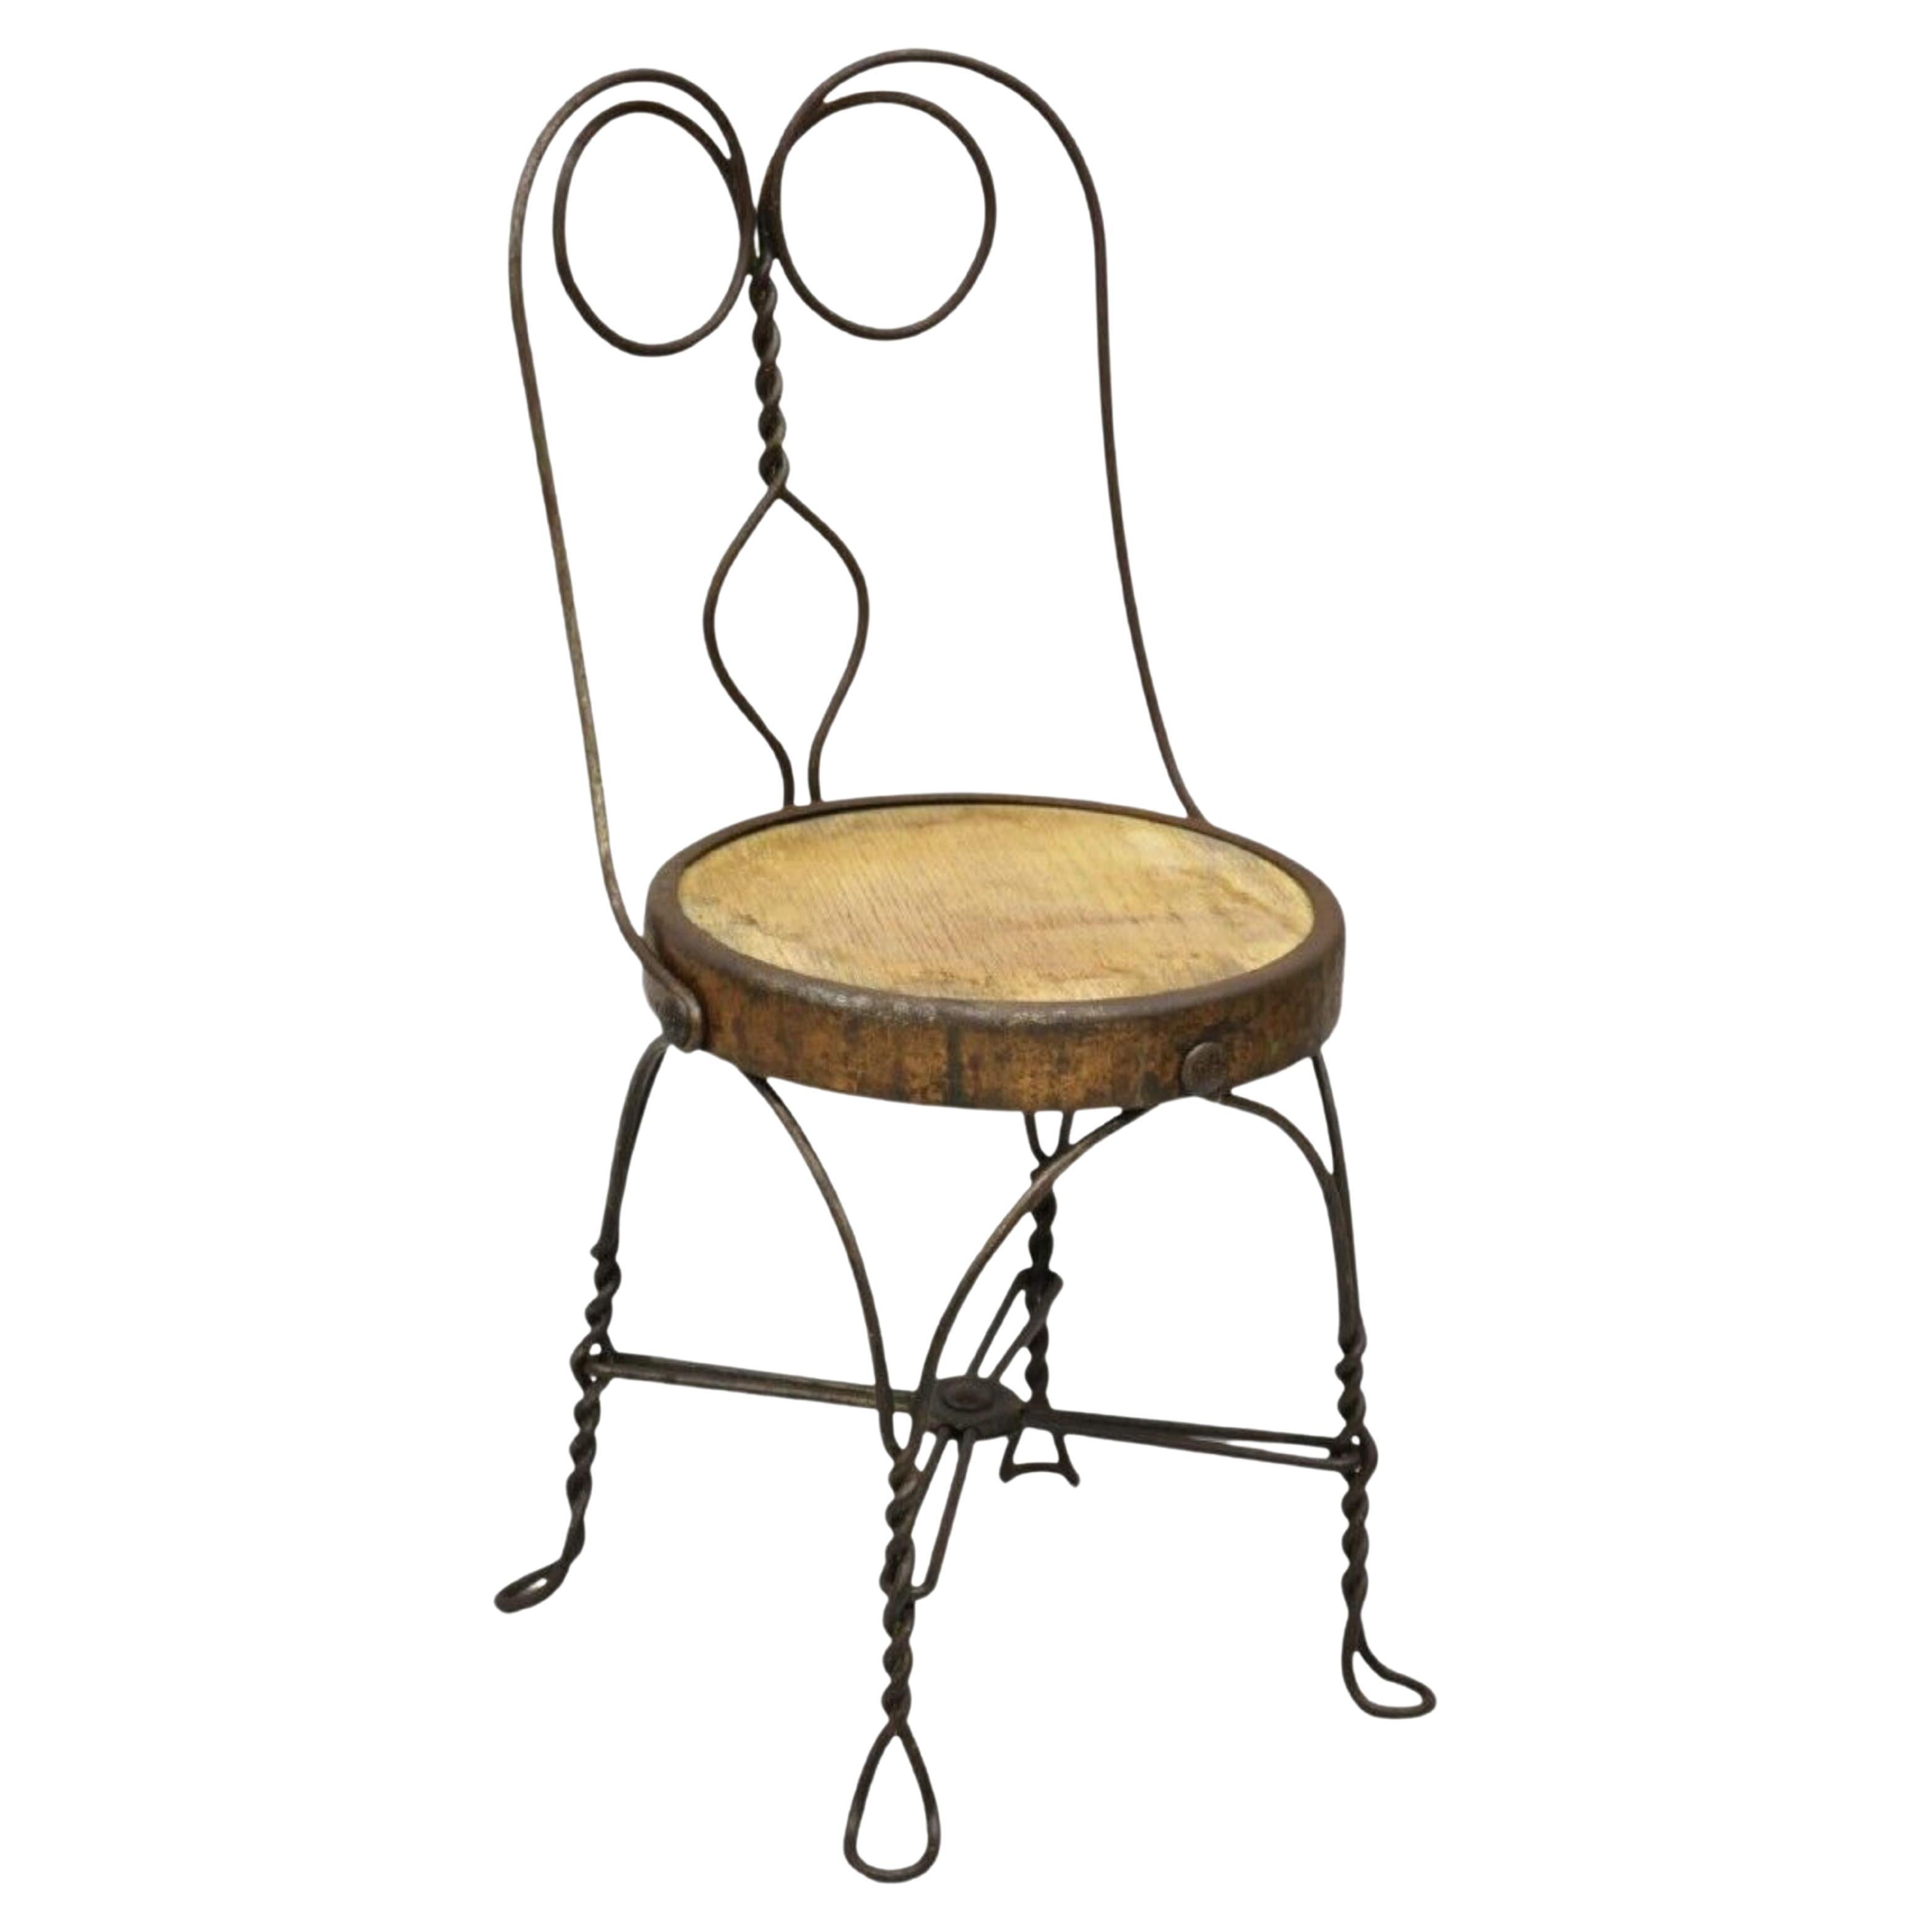 Antique Victorian Twisted Wire Wooden Seat Small Child's Ice Cream Parlor Chair For Sale